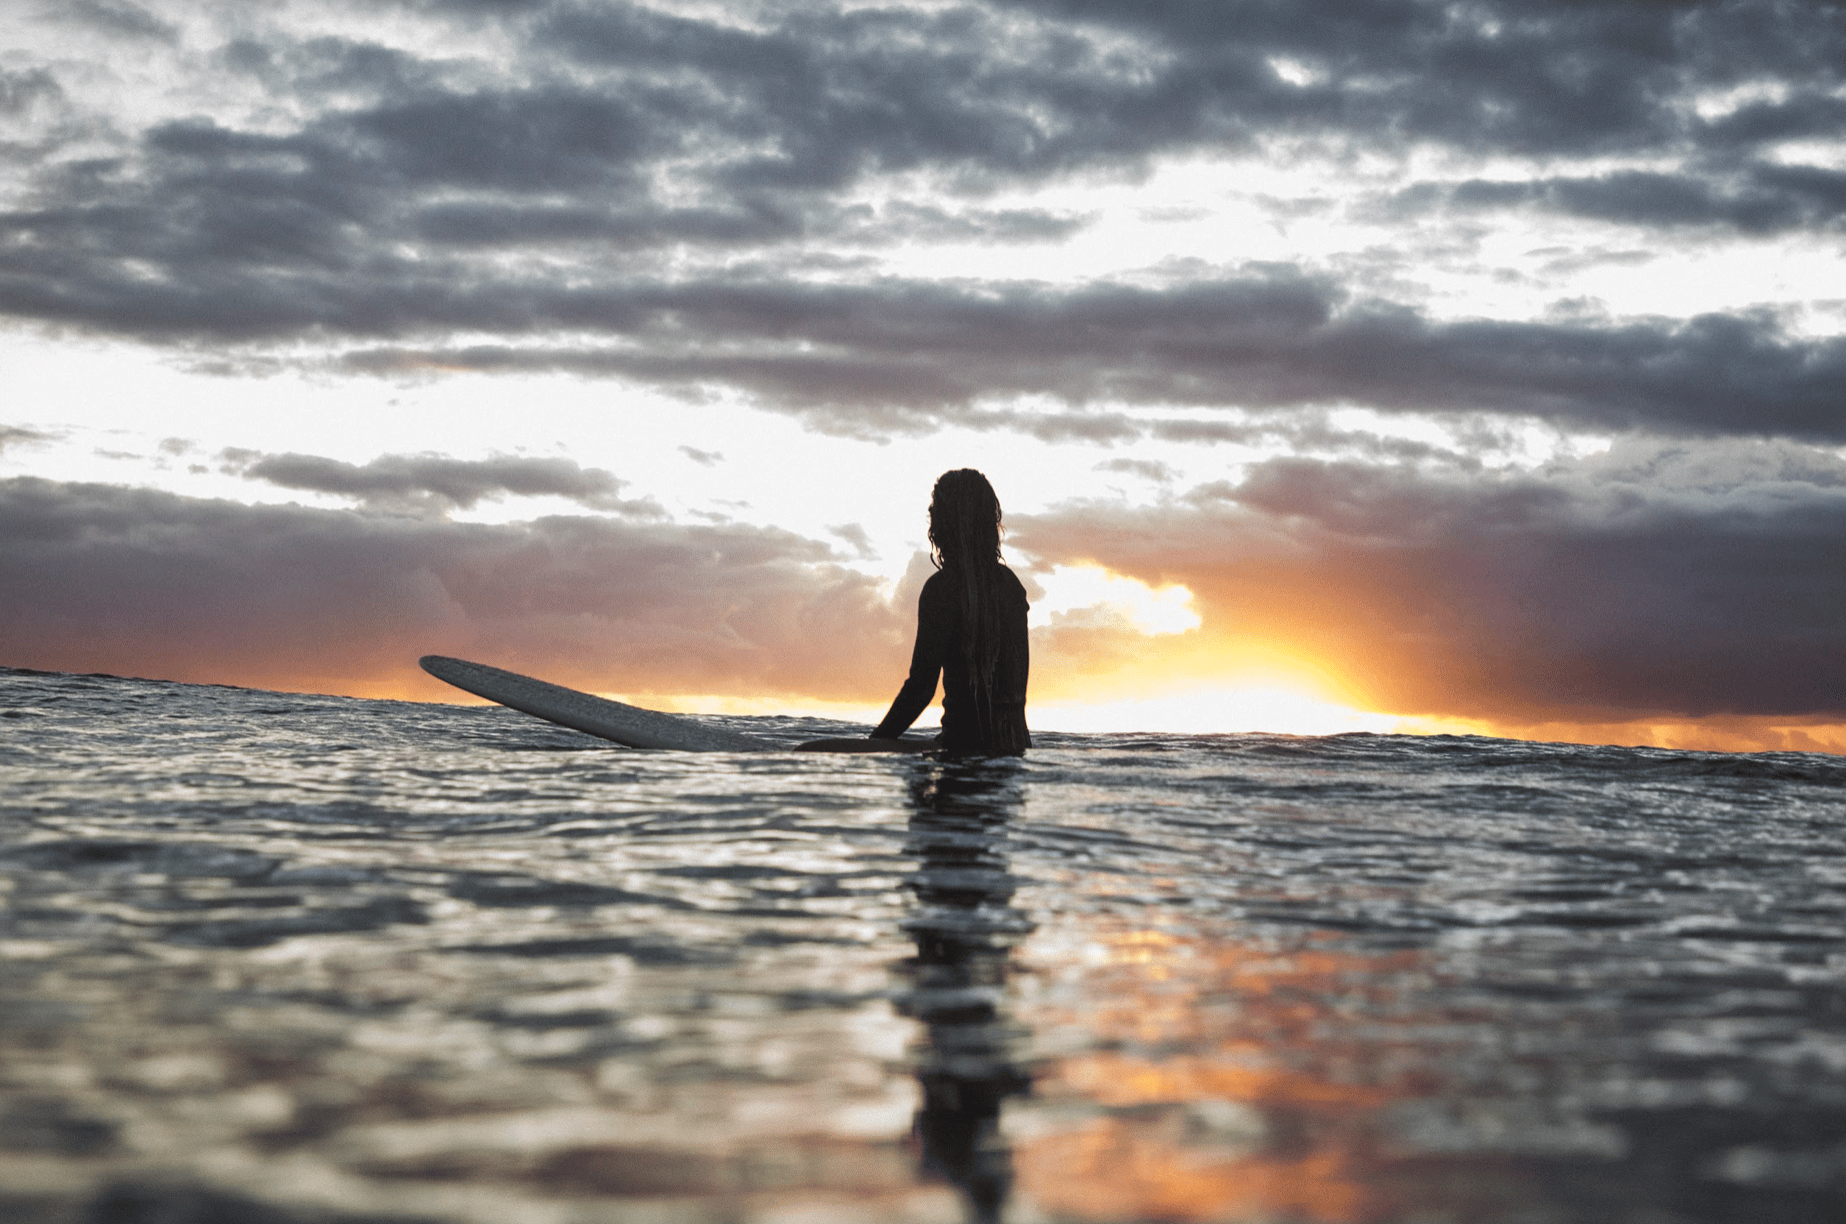 Is surfing relaxing?